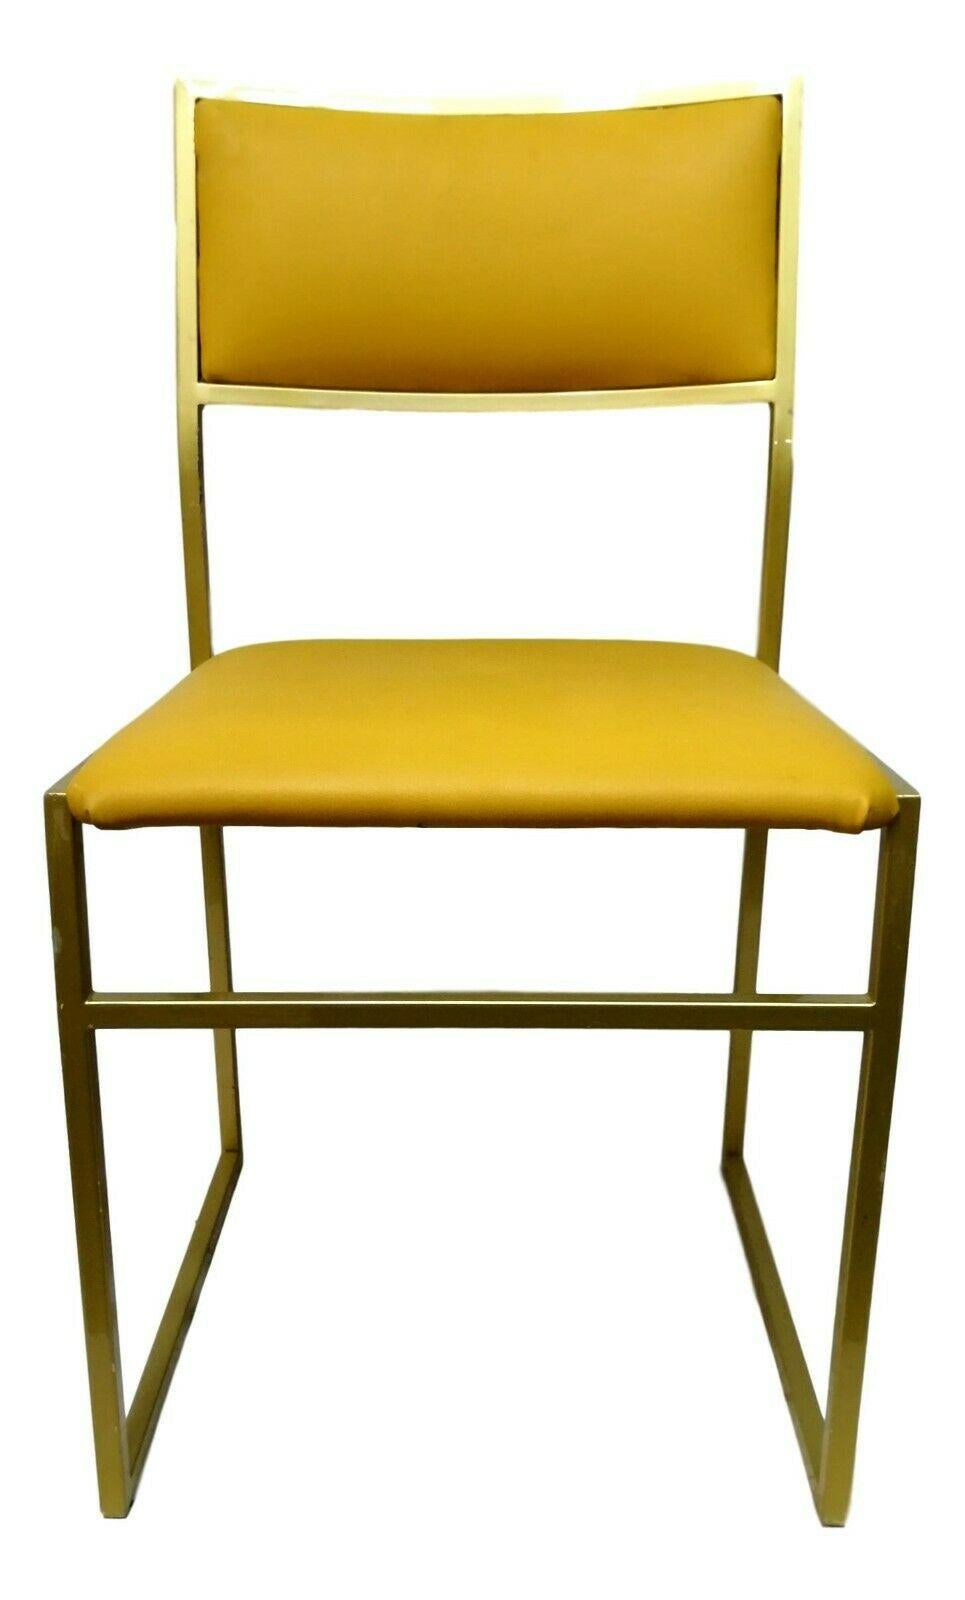 Lot of Six Collectible Coloured Chairs in Gold Metal, 1970s For Sale 1